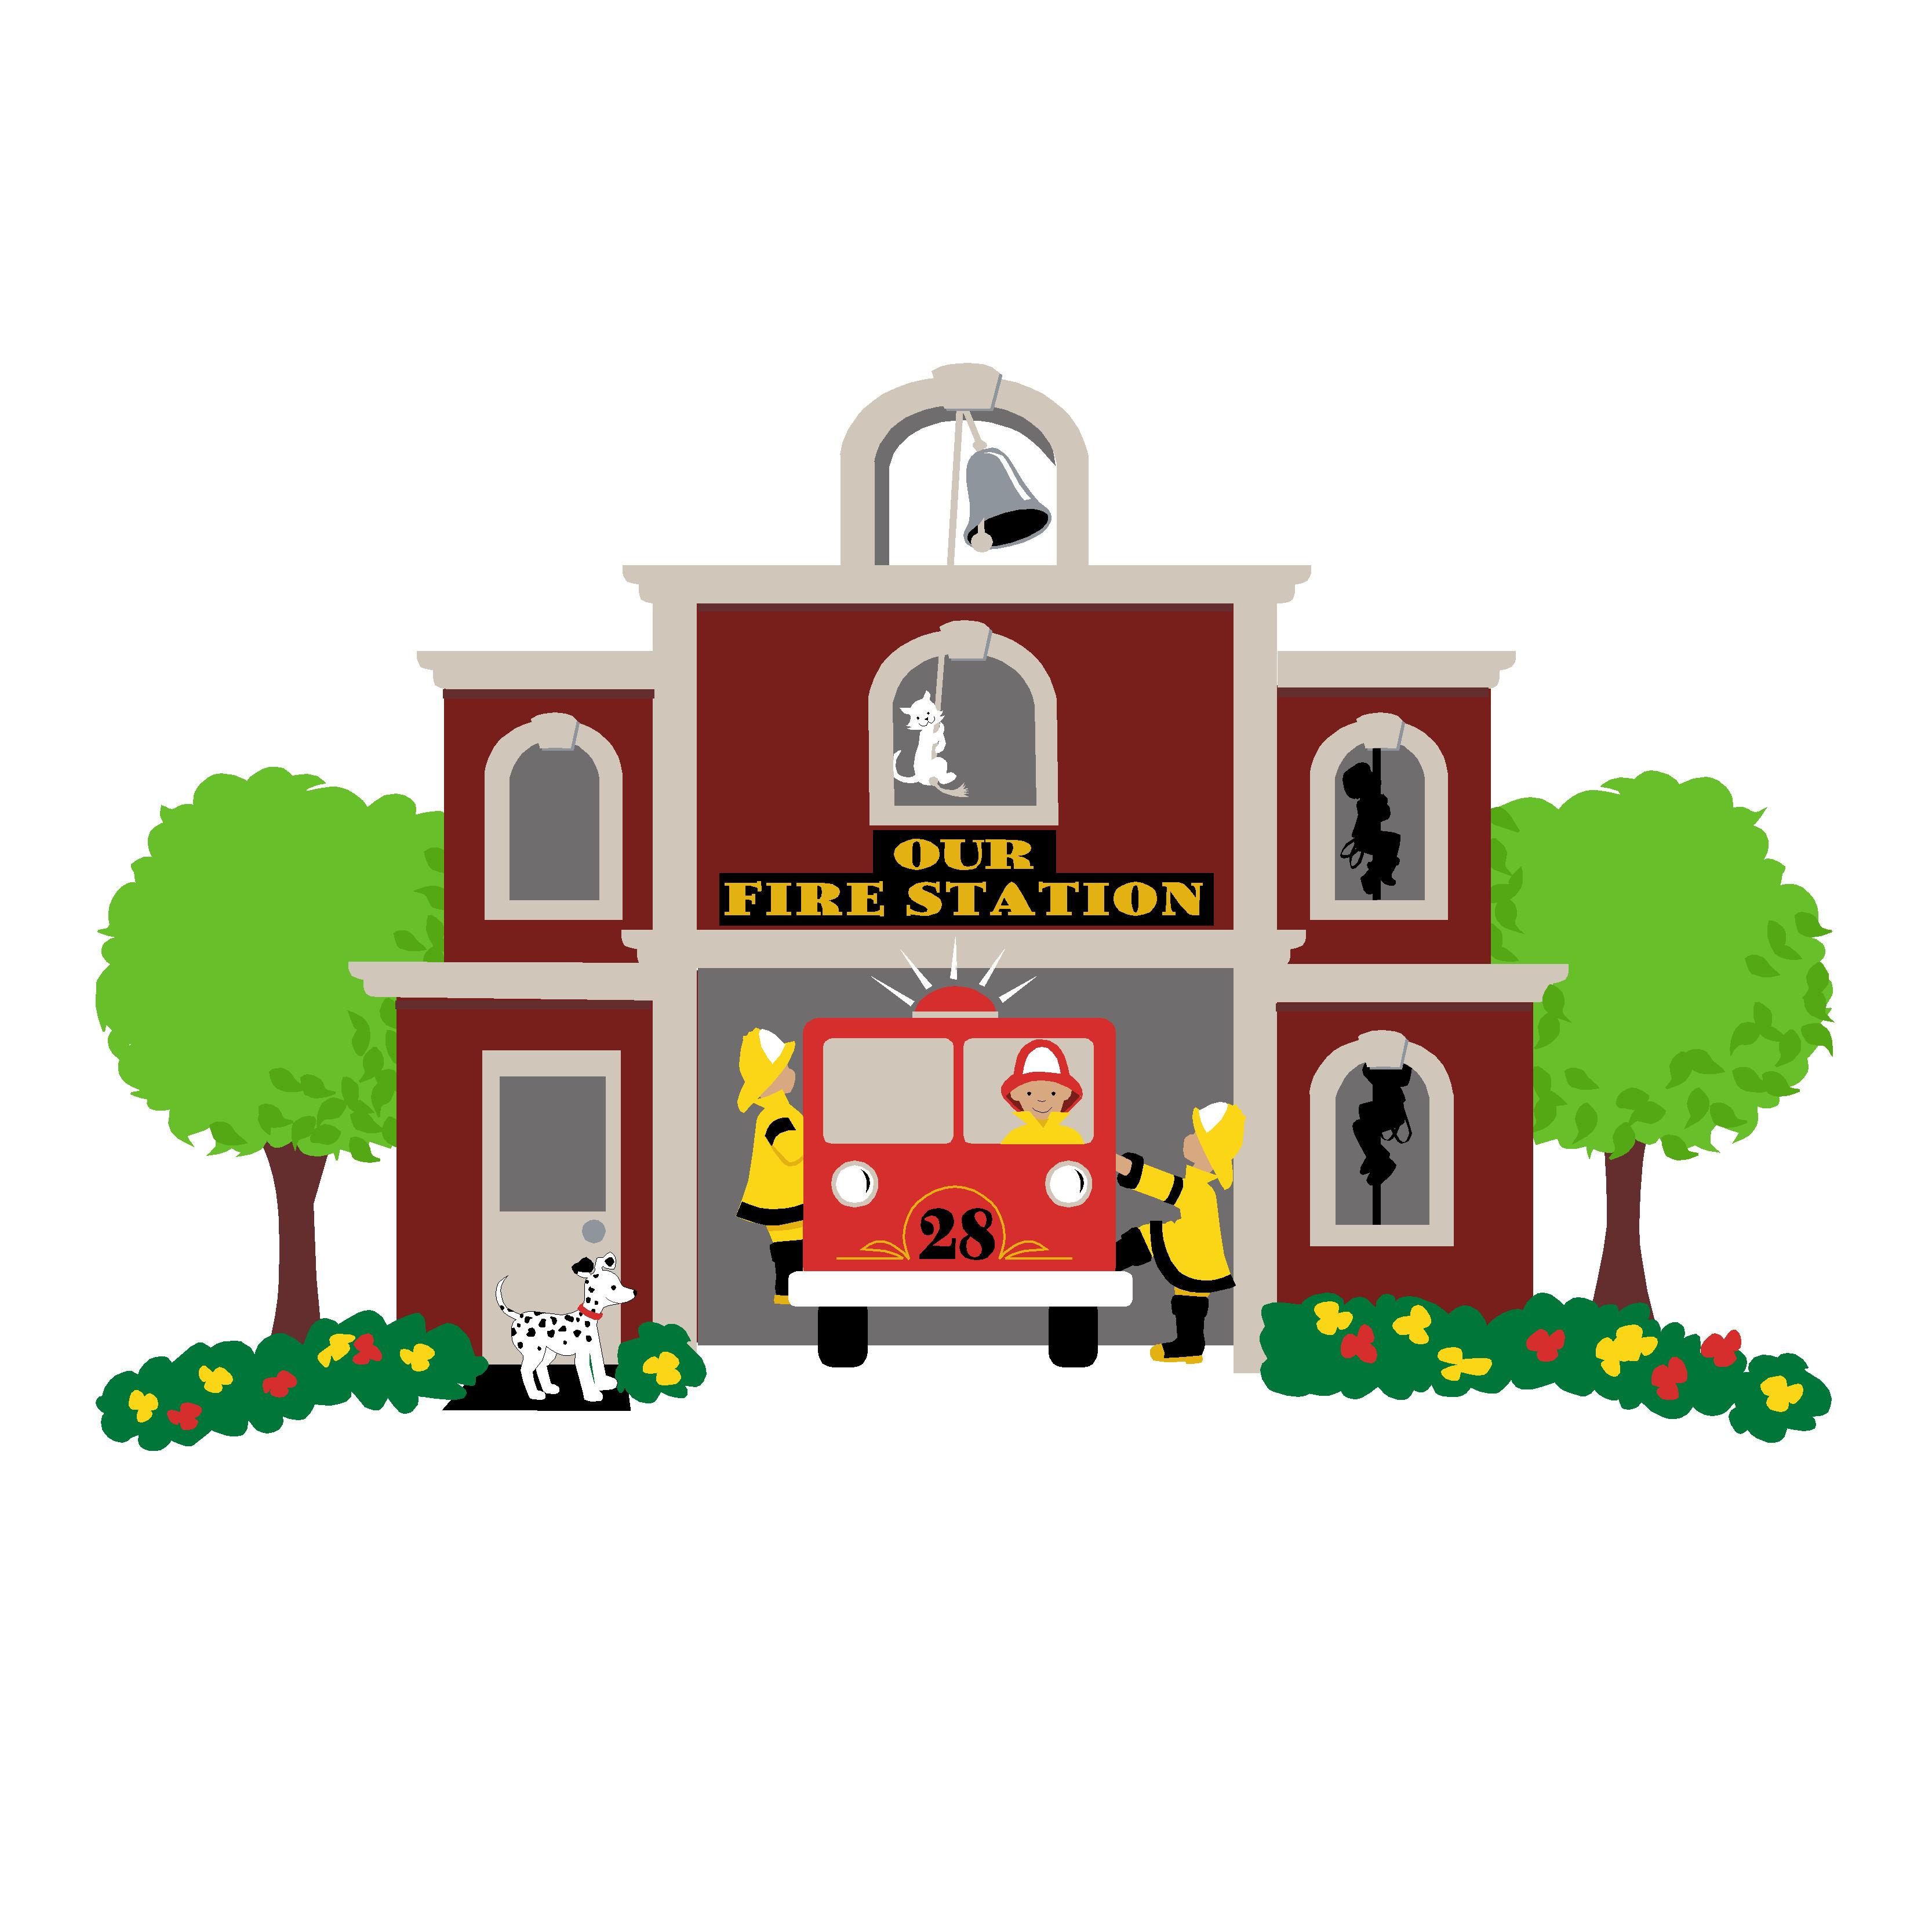 Fire Station drawing free image download